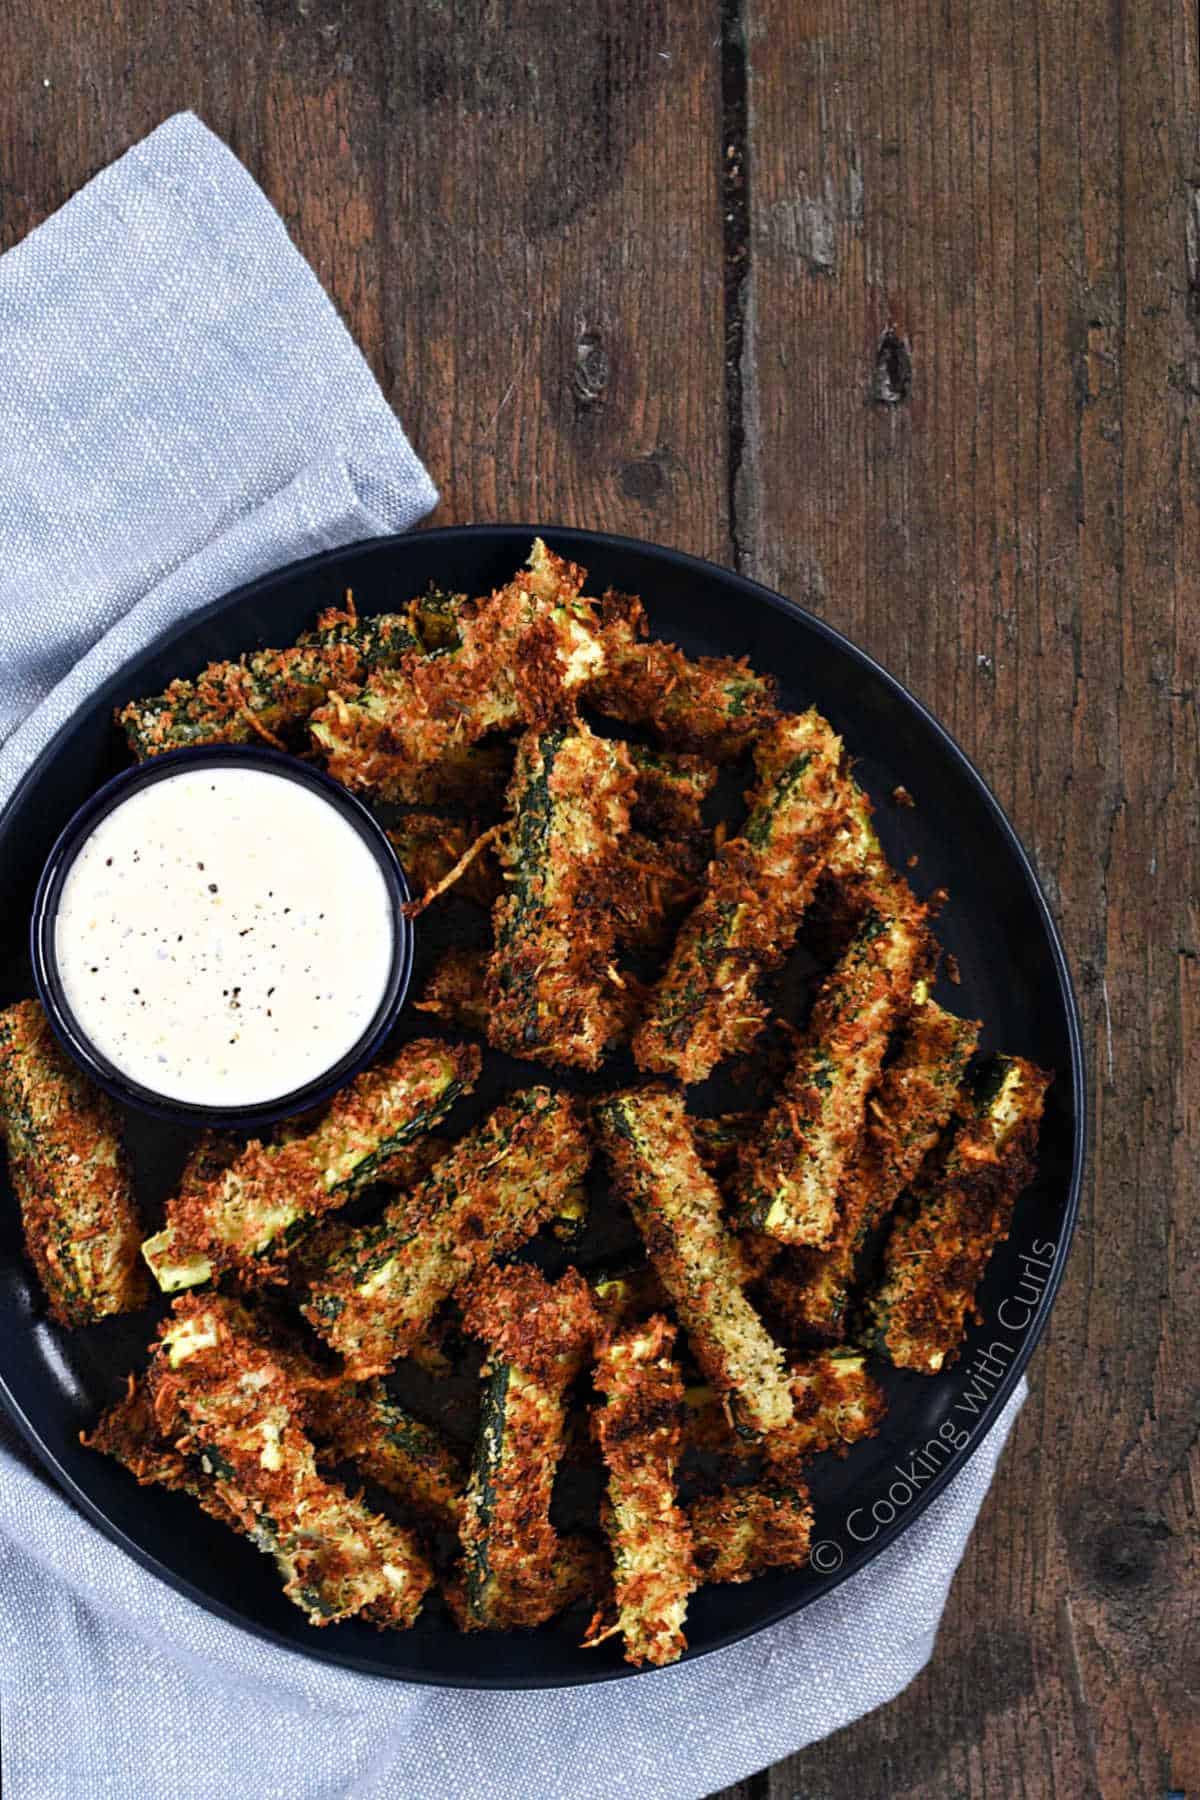 Looking down on a plate of crispy zucchini fries with a side of ranch dressing.